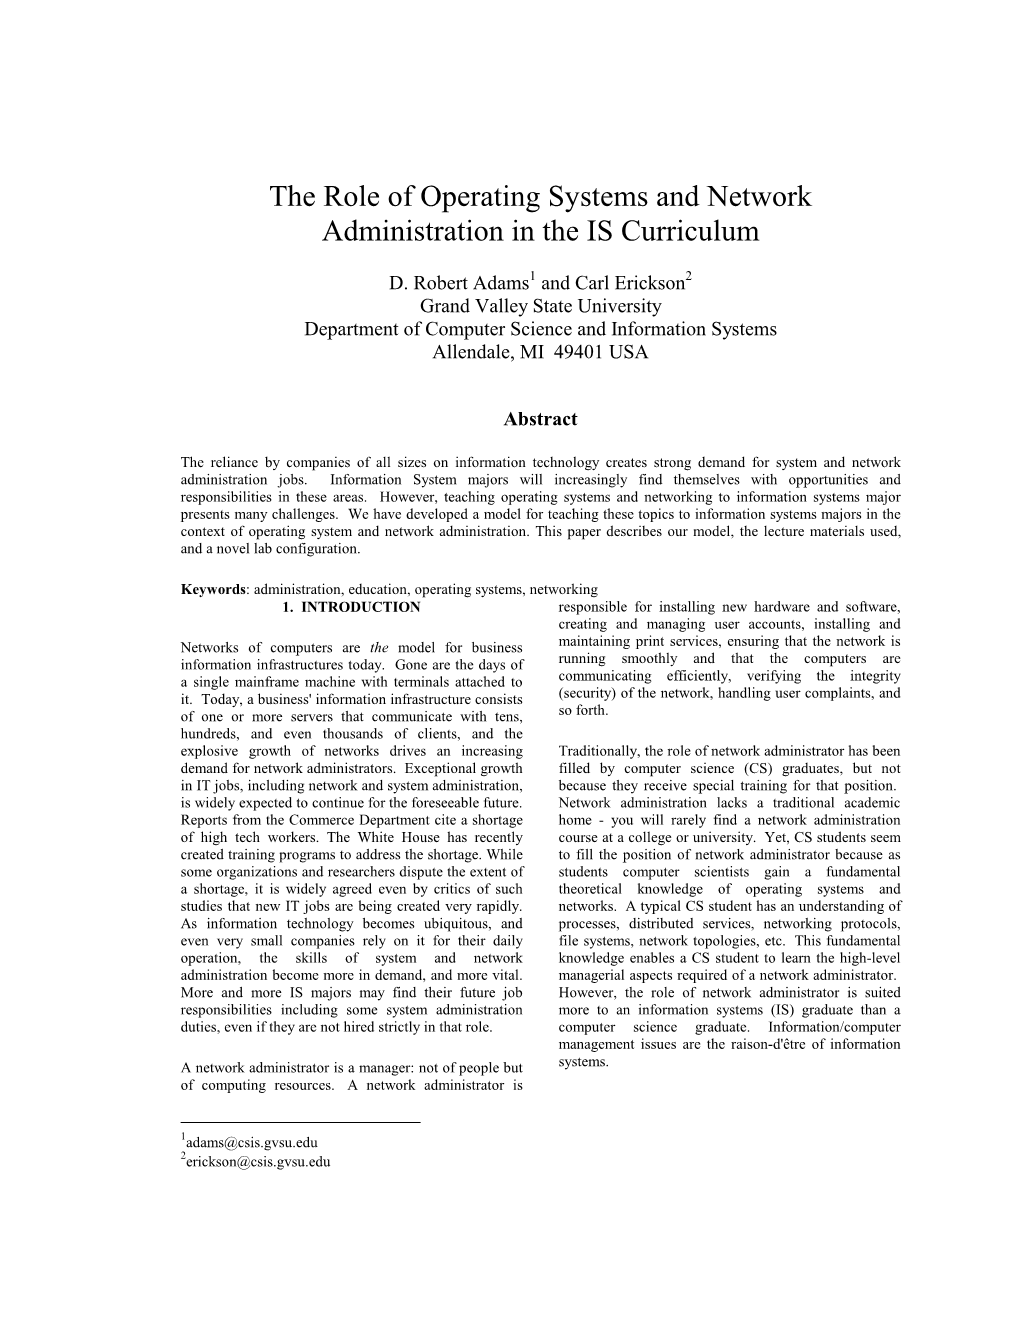 The Role of Operating Systems and Network Administration in the IS Curriculum